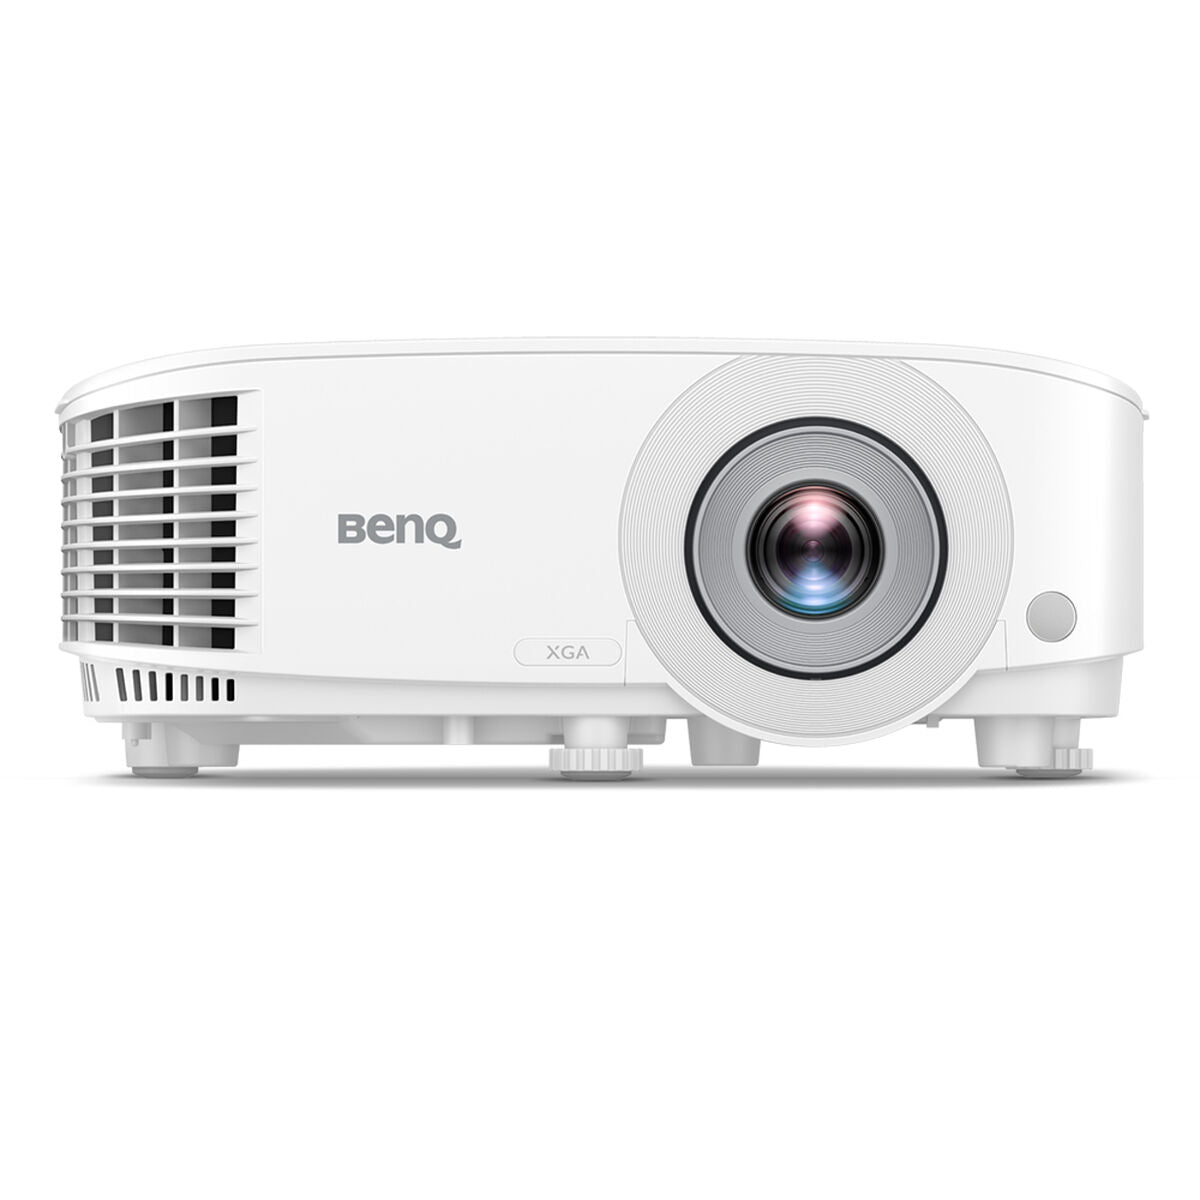 Projector BenQ 9H.JNE77.1HE 4000 Lm, BenQ, Electronics, Photography and video cameras, projector-benq-9h-jne77-1he-4000-lm, Brand_BenQ, category-reference-2609, category-reference-2642, category-reference-2947, category-reference-t-19653, category-reference-t-8122, computers / peripherals, Condition_NEW, entertainment, fotografía, office, Price_500 - 600, RiotNook